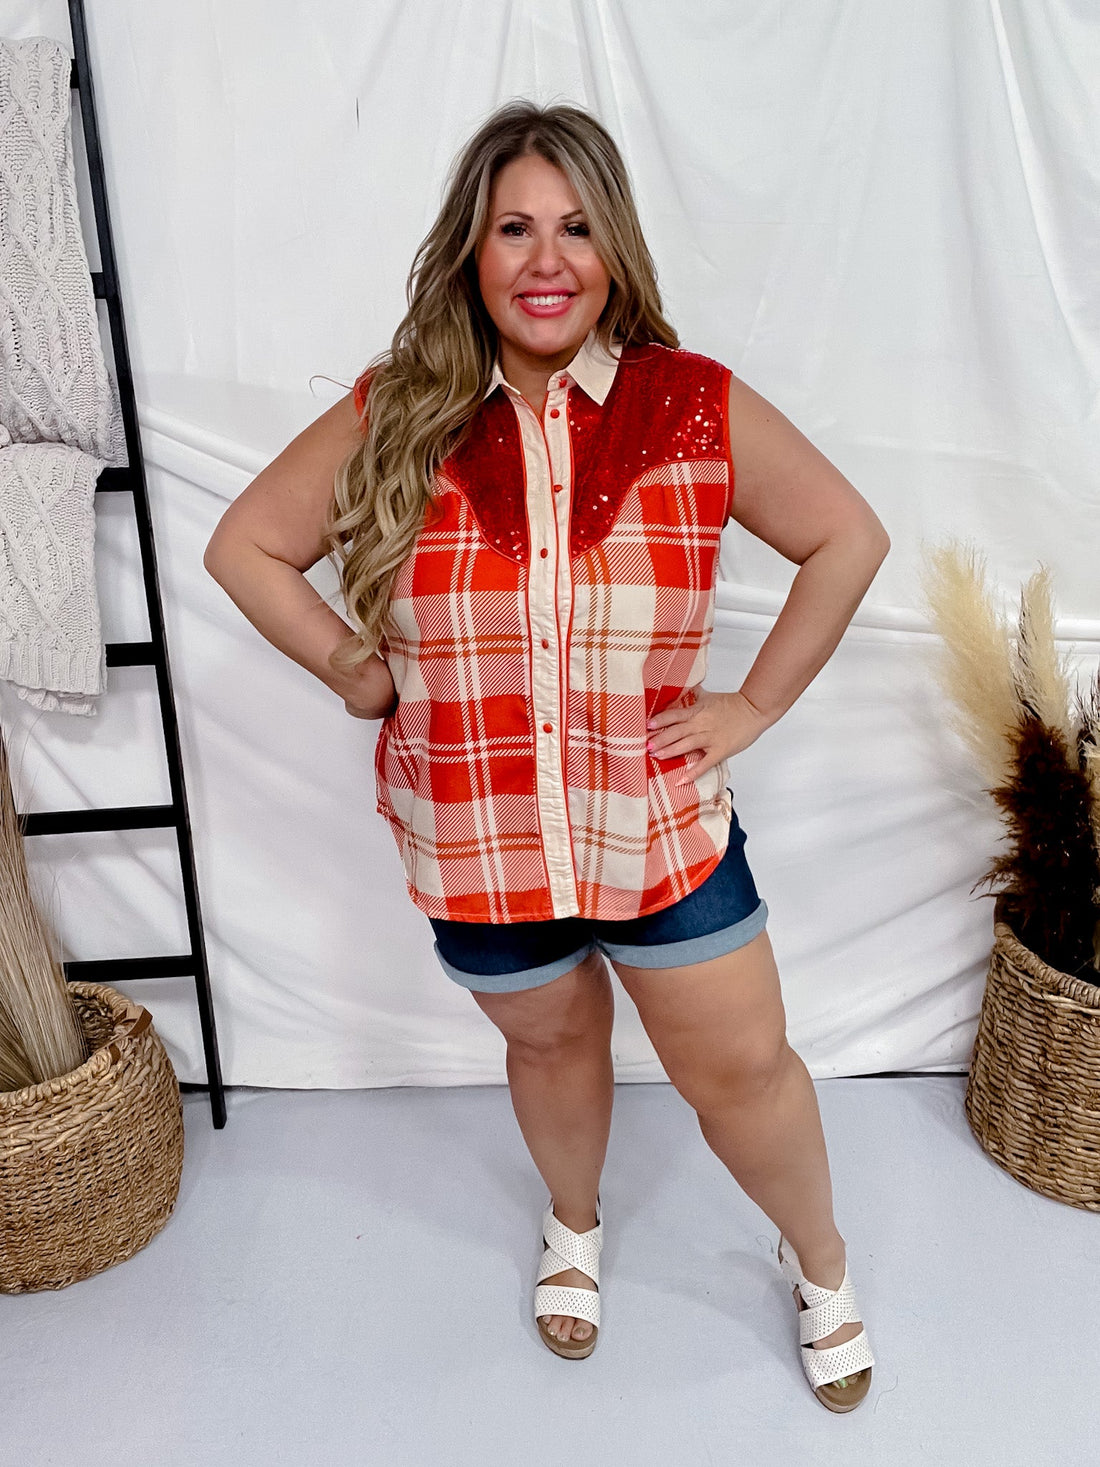 Red & Plaid Sequin Collard "Yee Haw" Vest - Whiskey Skies - SOUTHERN GRACE